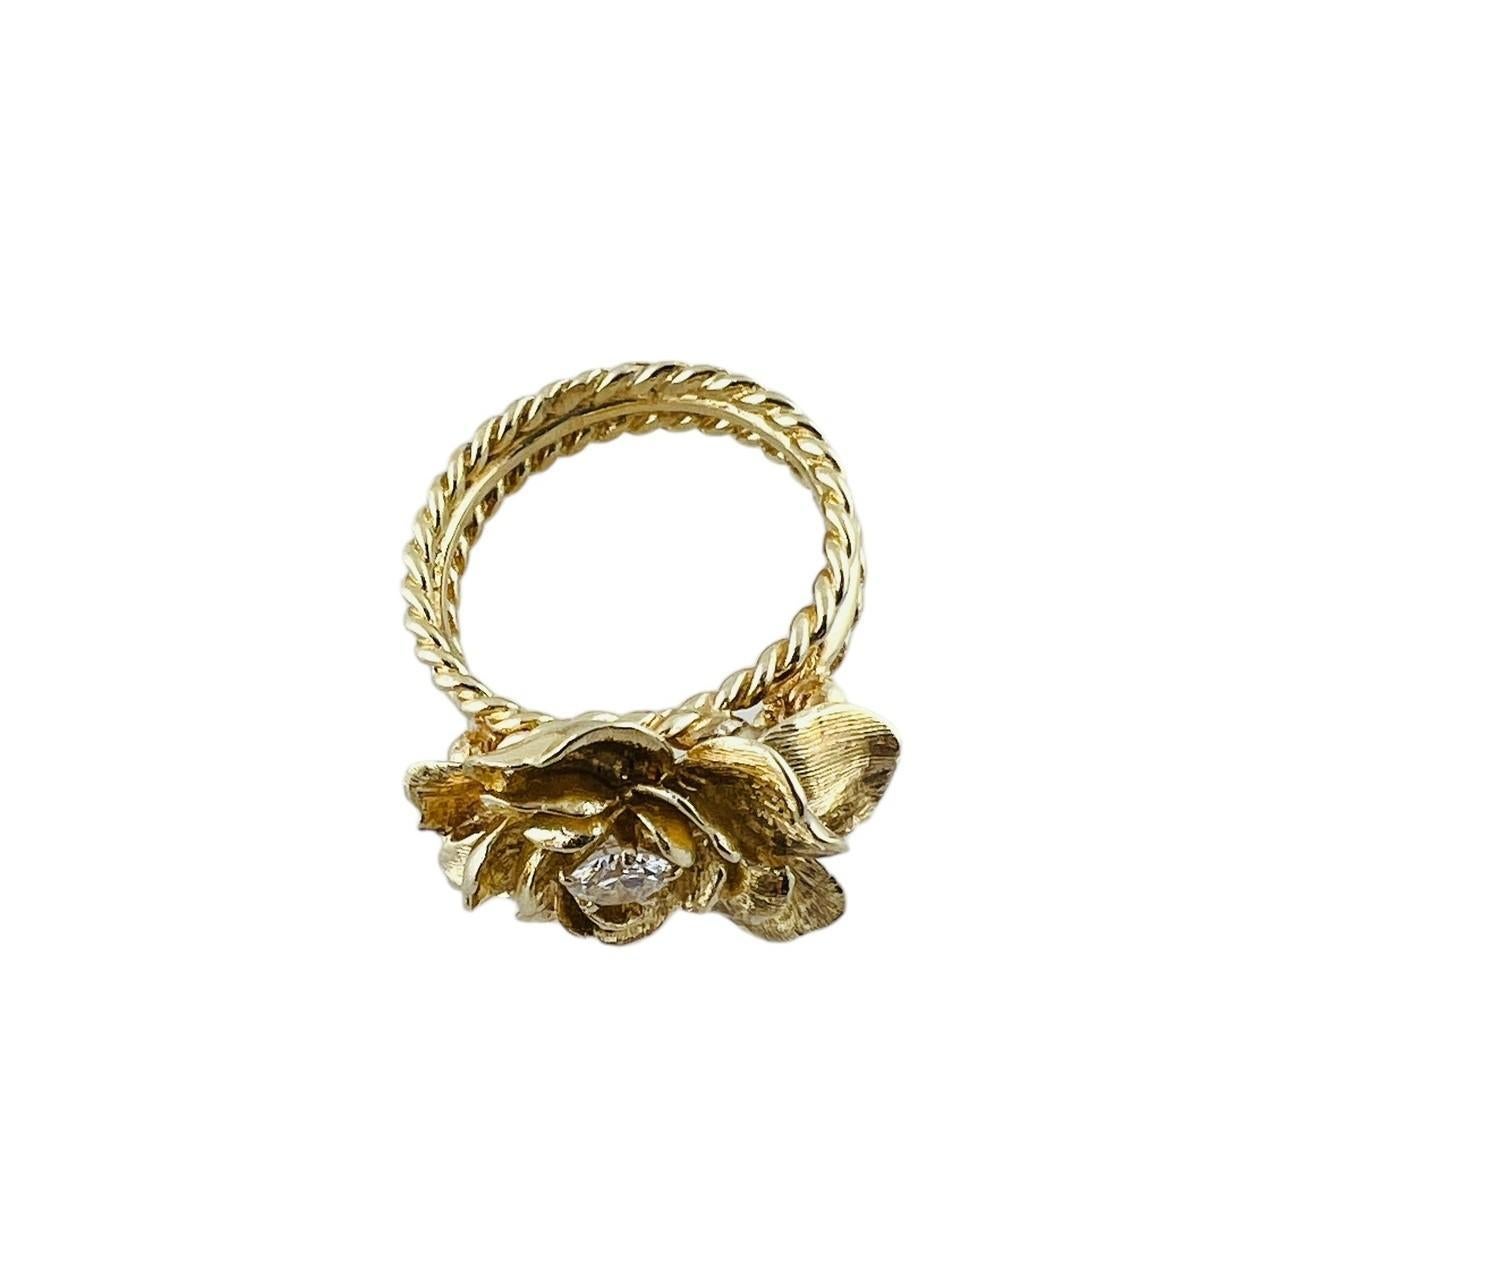 Brilliant Cut 14K Yellow Gold Flower Cocktail Ring with Center Diamond #16577